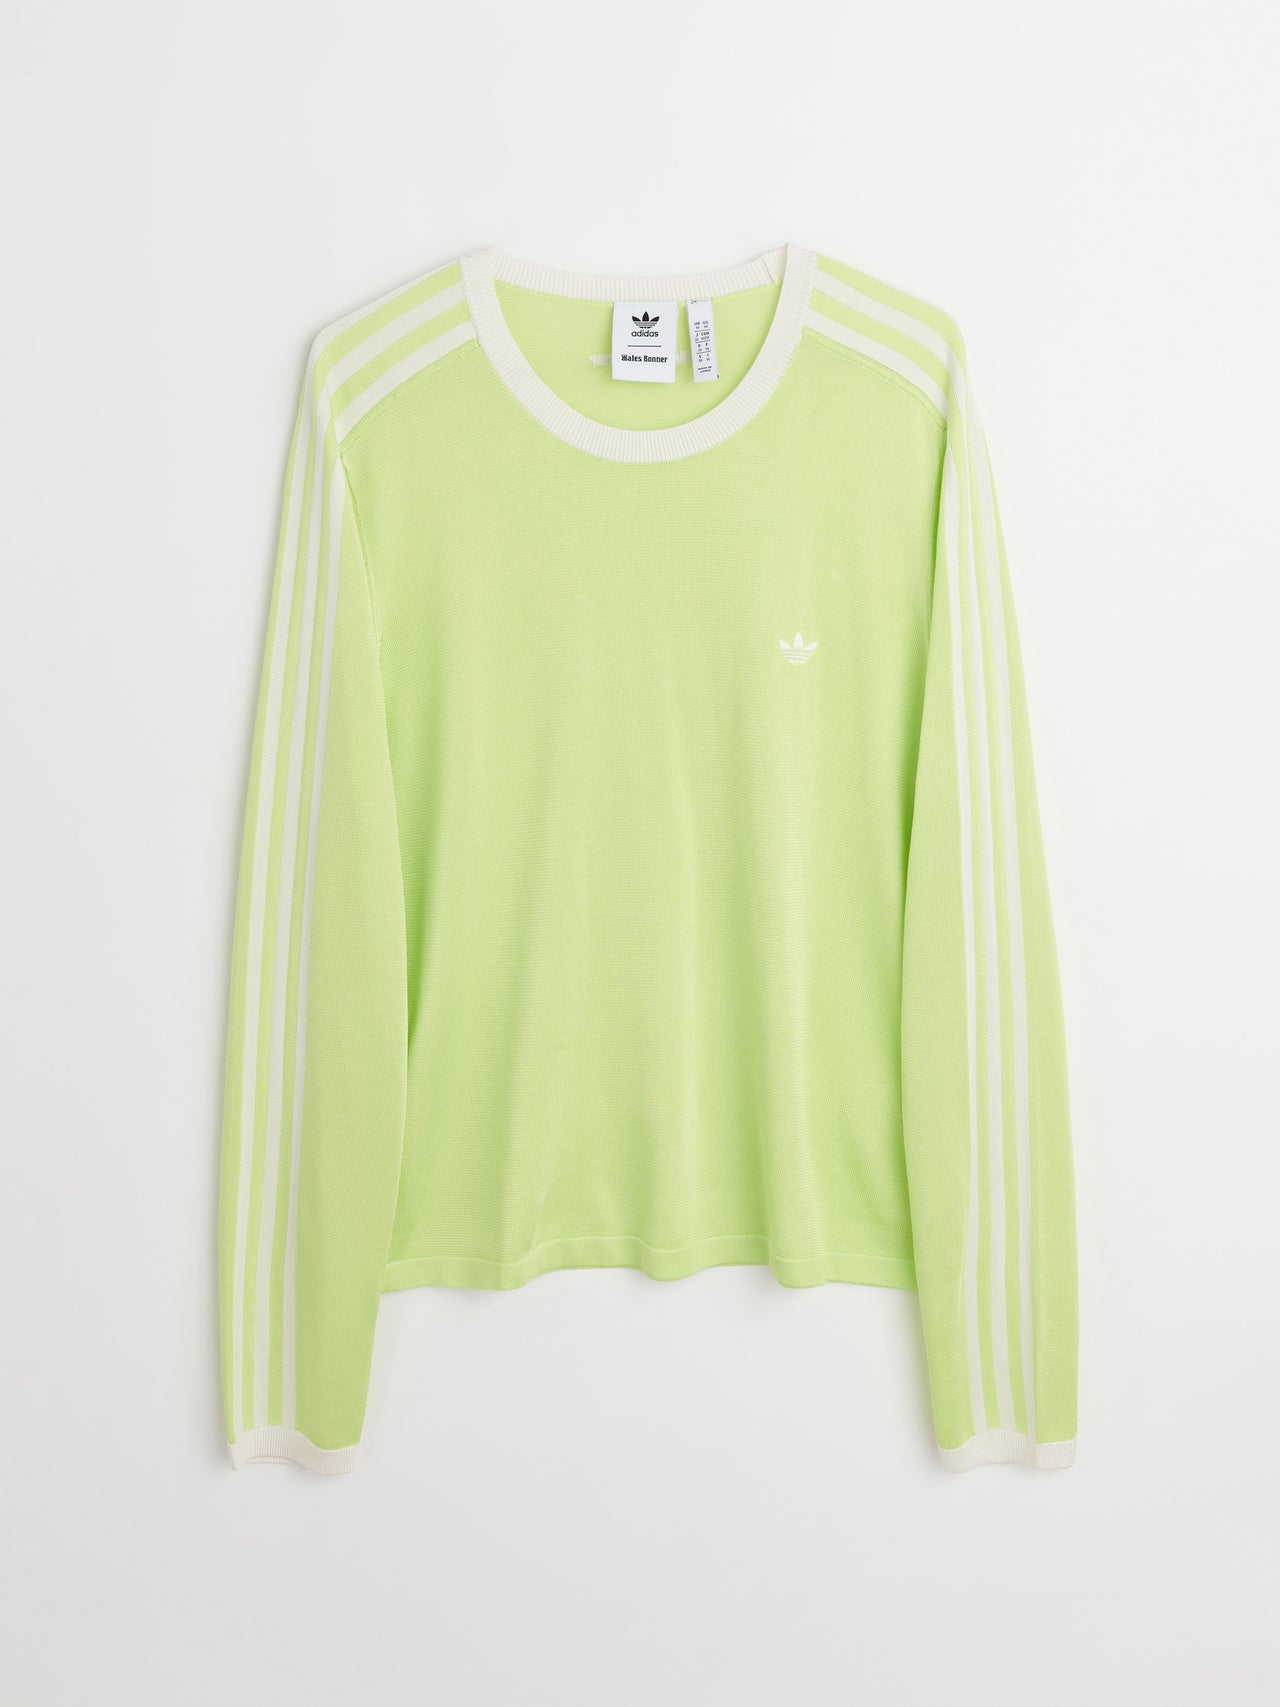 adidas Originals by Wales Bonner Knit LS Tee Sefrye / Cwhite